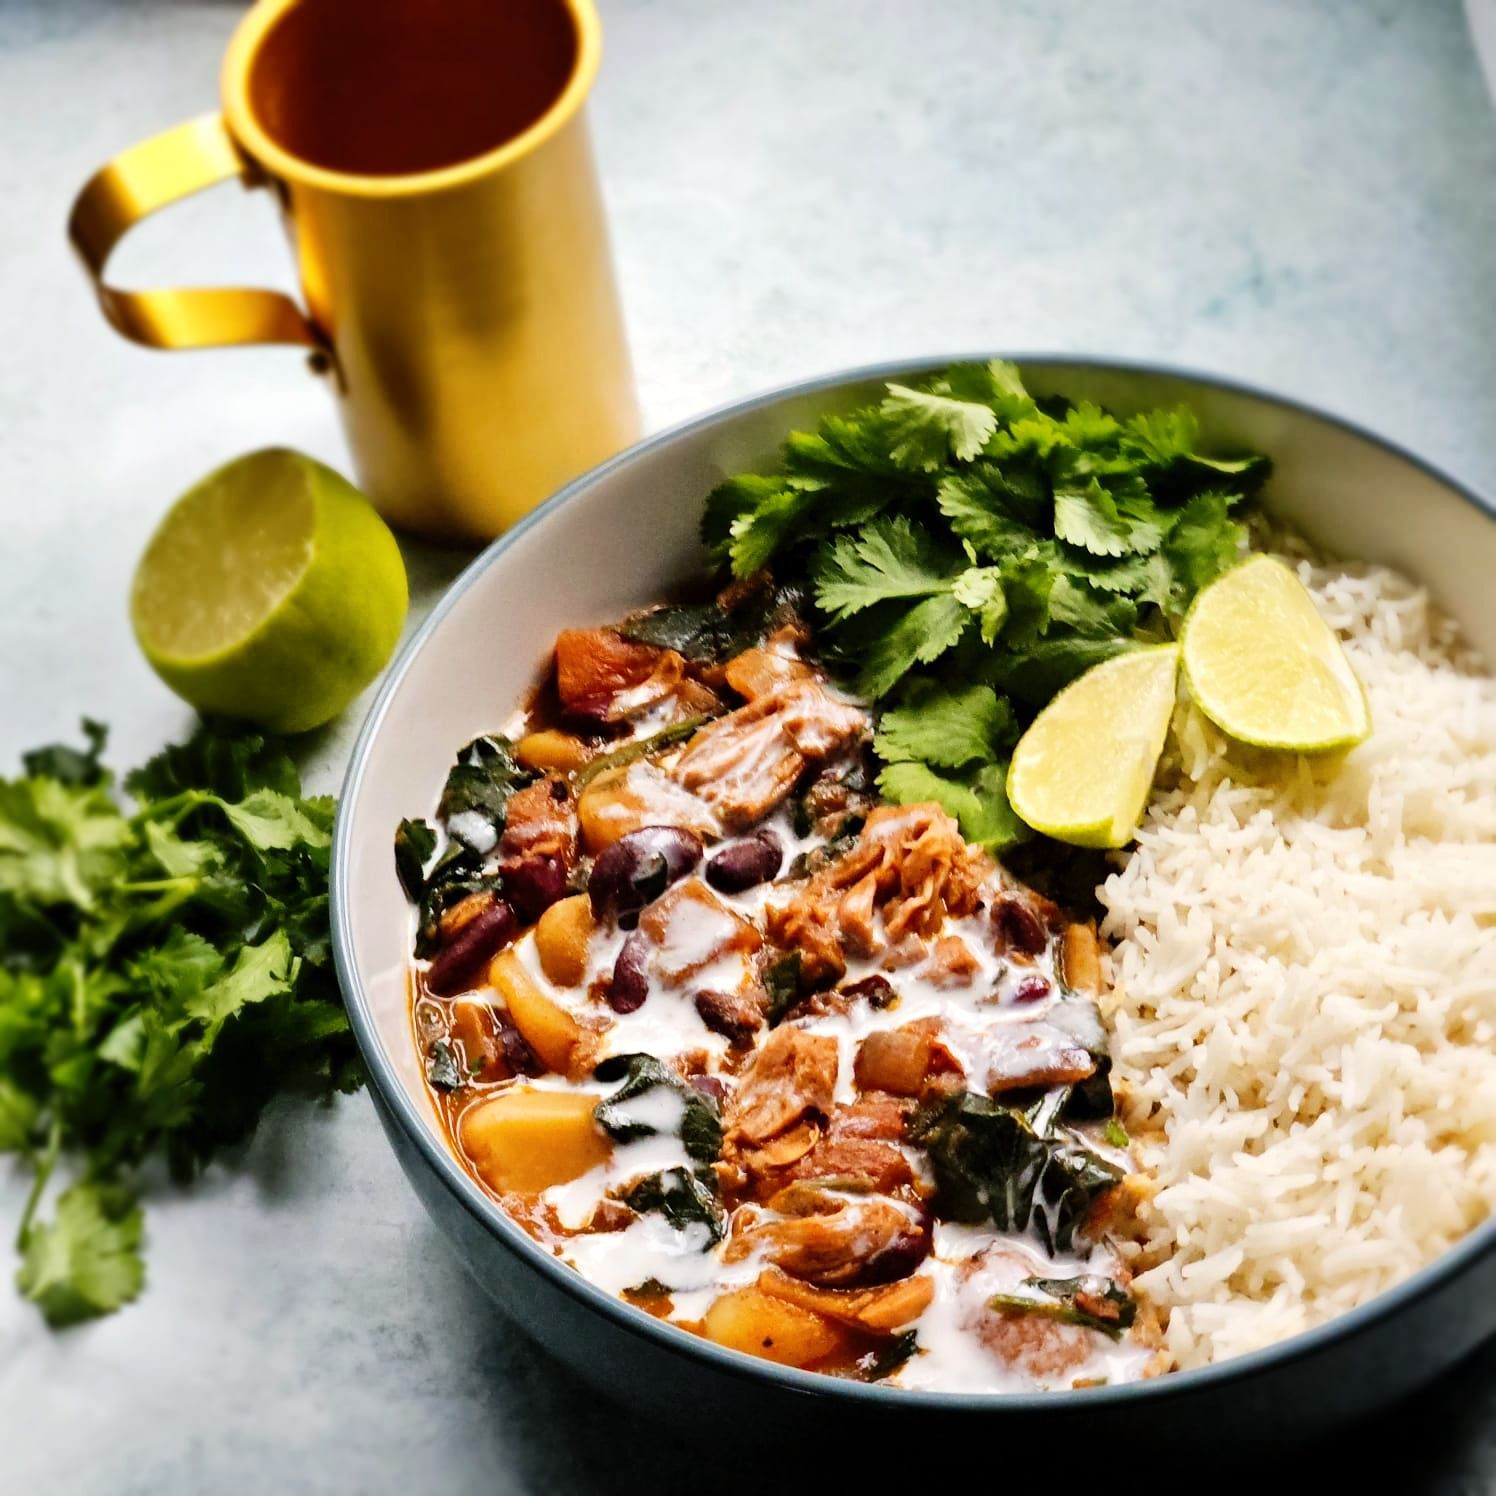 Jamaican Jerk Jackfruit and red bean stew in a bowl with rice, fresh coriander, and sliced lime wedges